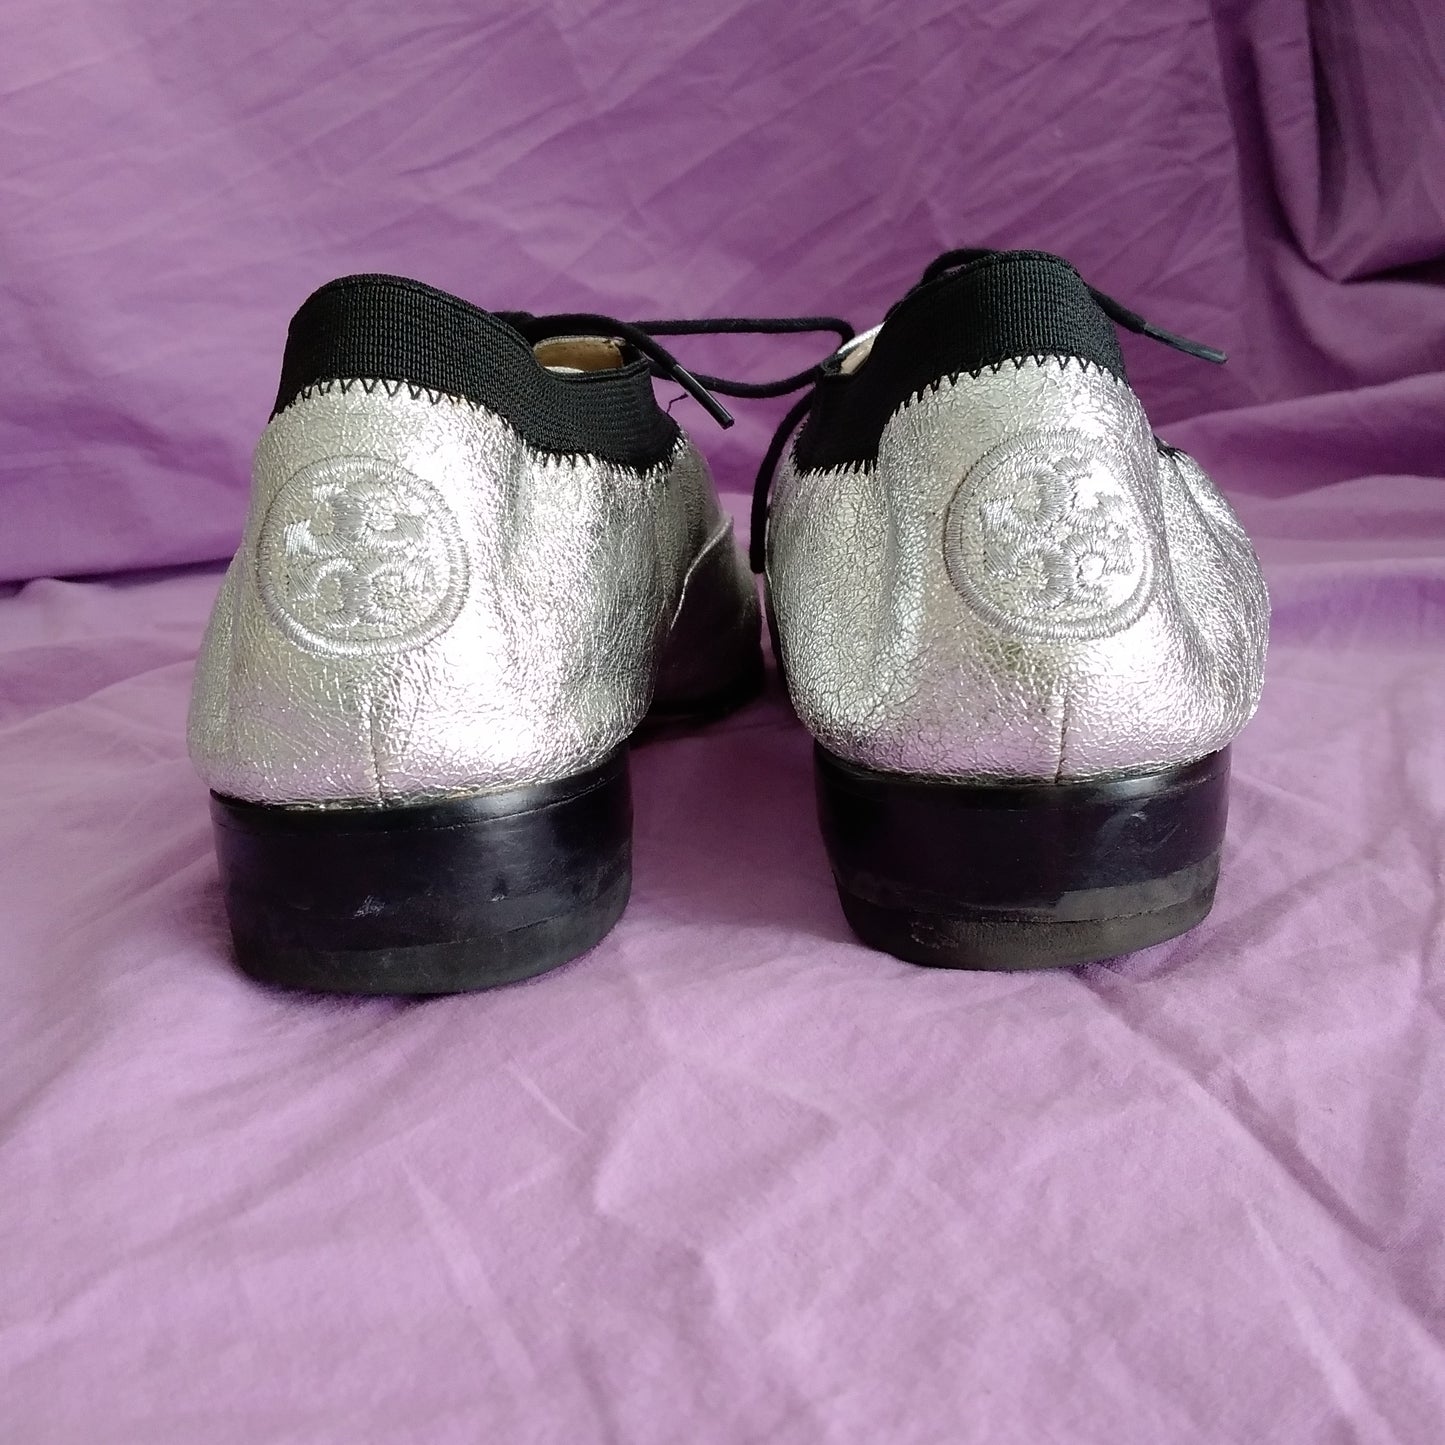 Tory Burch Silver Metallic Leather Bombe Oxford Shoes - Size 7.5